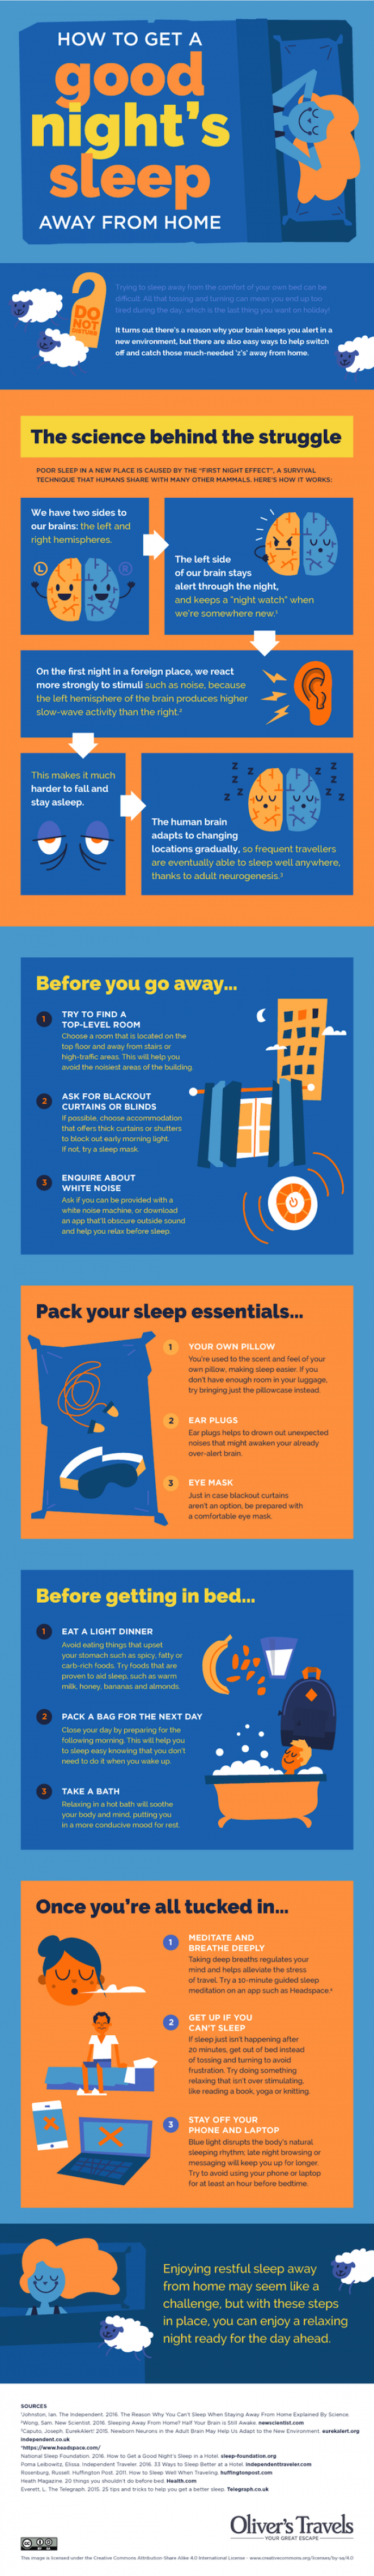 How to get quality sleep while traveling?